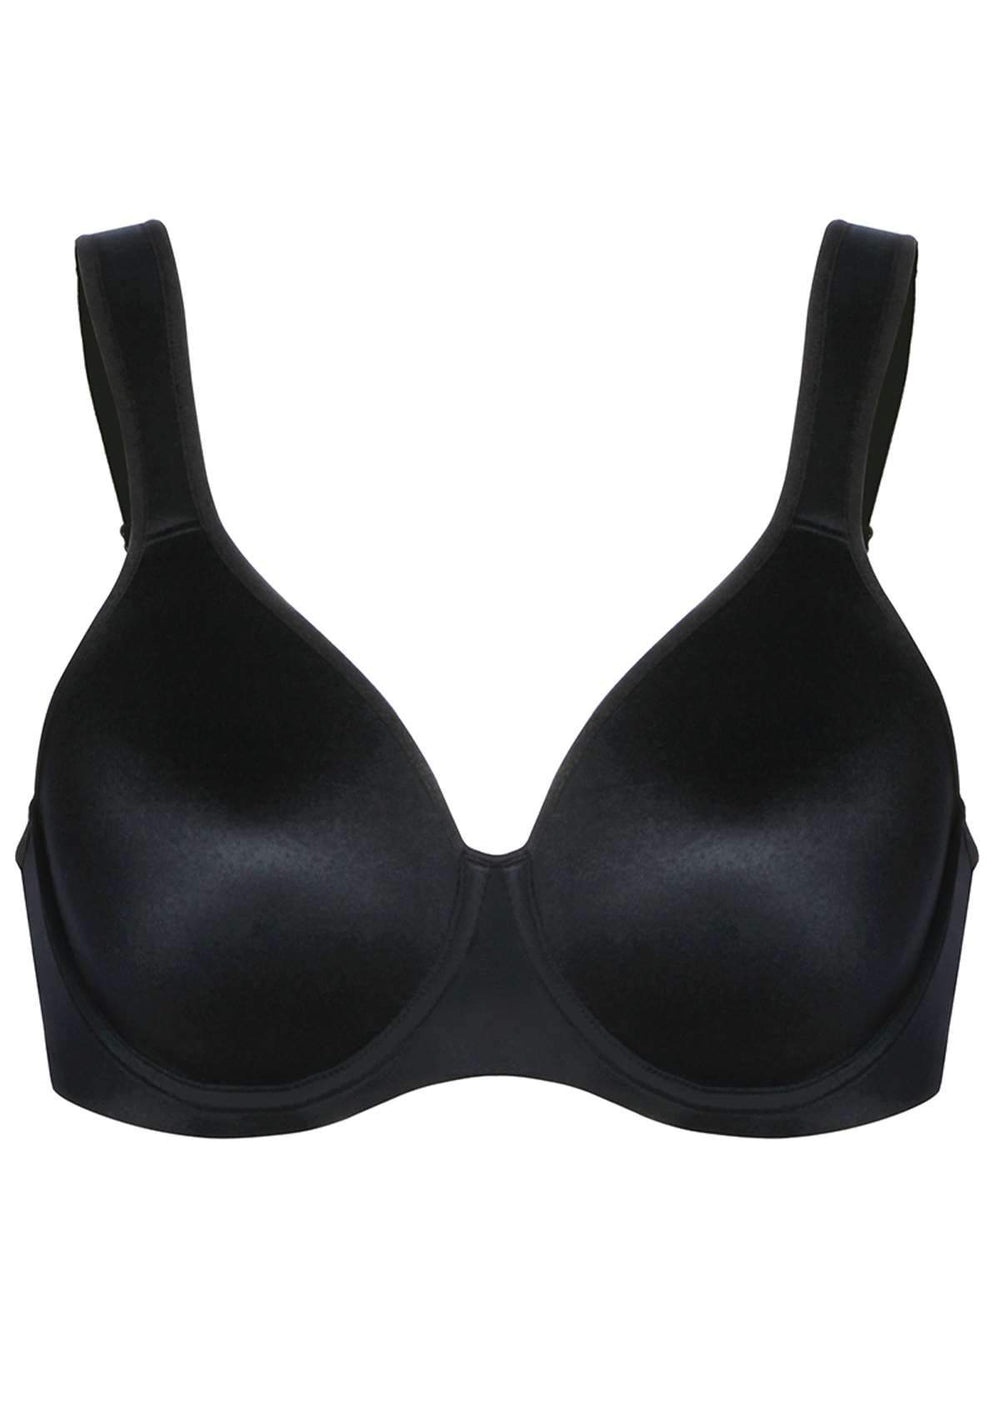 Buy HSIA Minimizer Bras for Women Full Coverage,Unlined Non